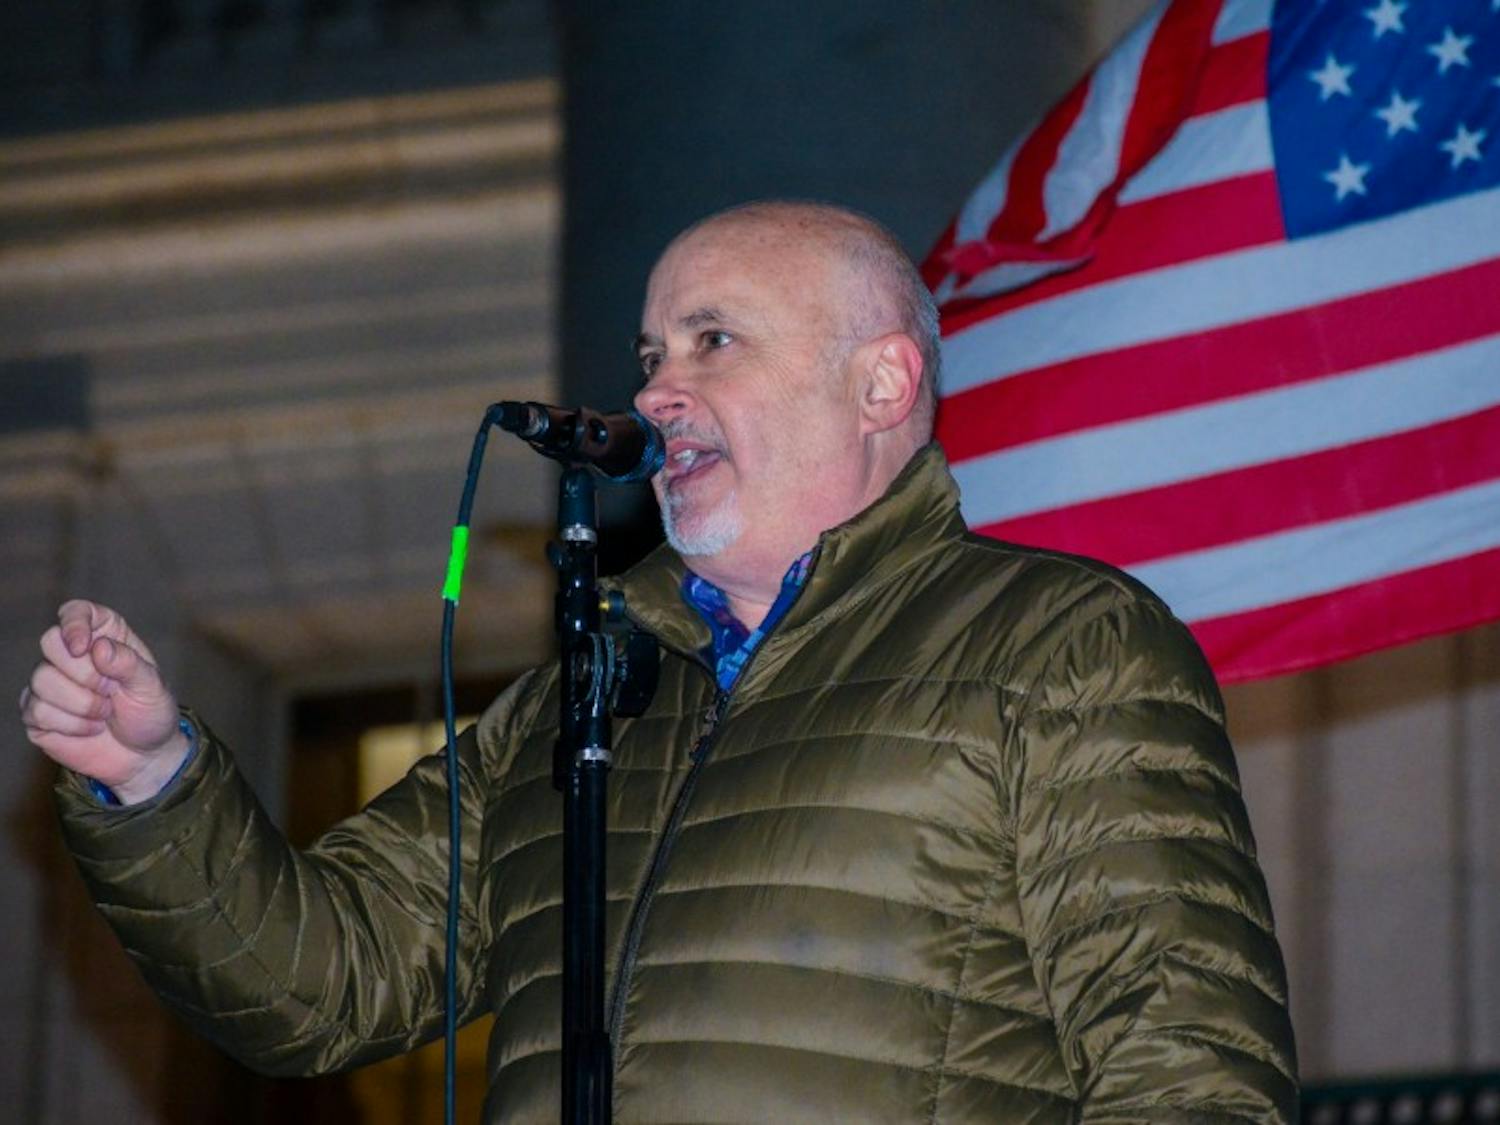 US Rep. Mark Pocan, D-Madison, spoke to hundreds of Madison residents Thursday evening at a rally protesting President Trump’s removal of Deputy Attorney General Rod Rosenstein from overseeing Robert Mueller’s investigation into the Trump campaign.